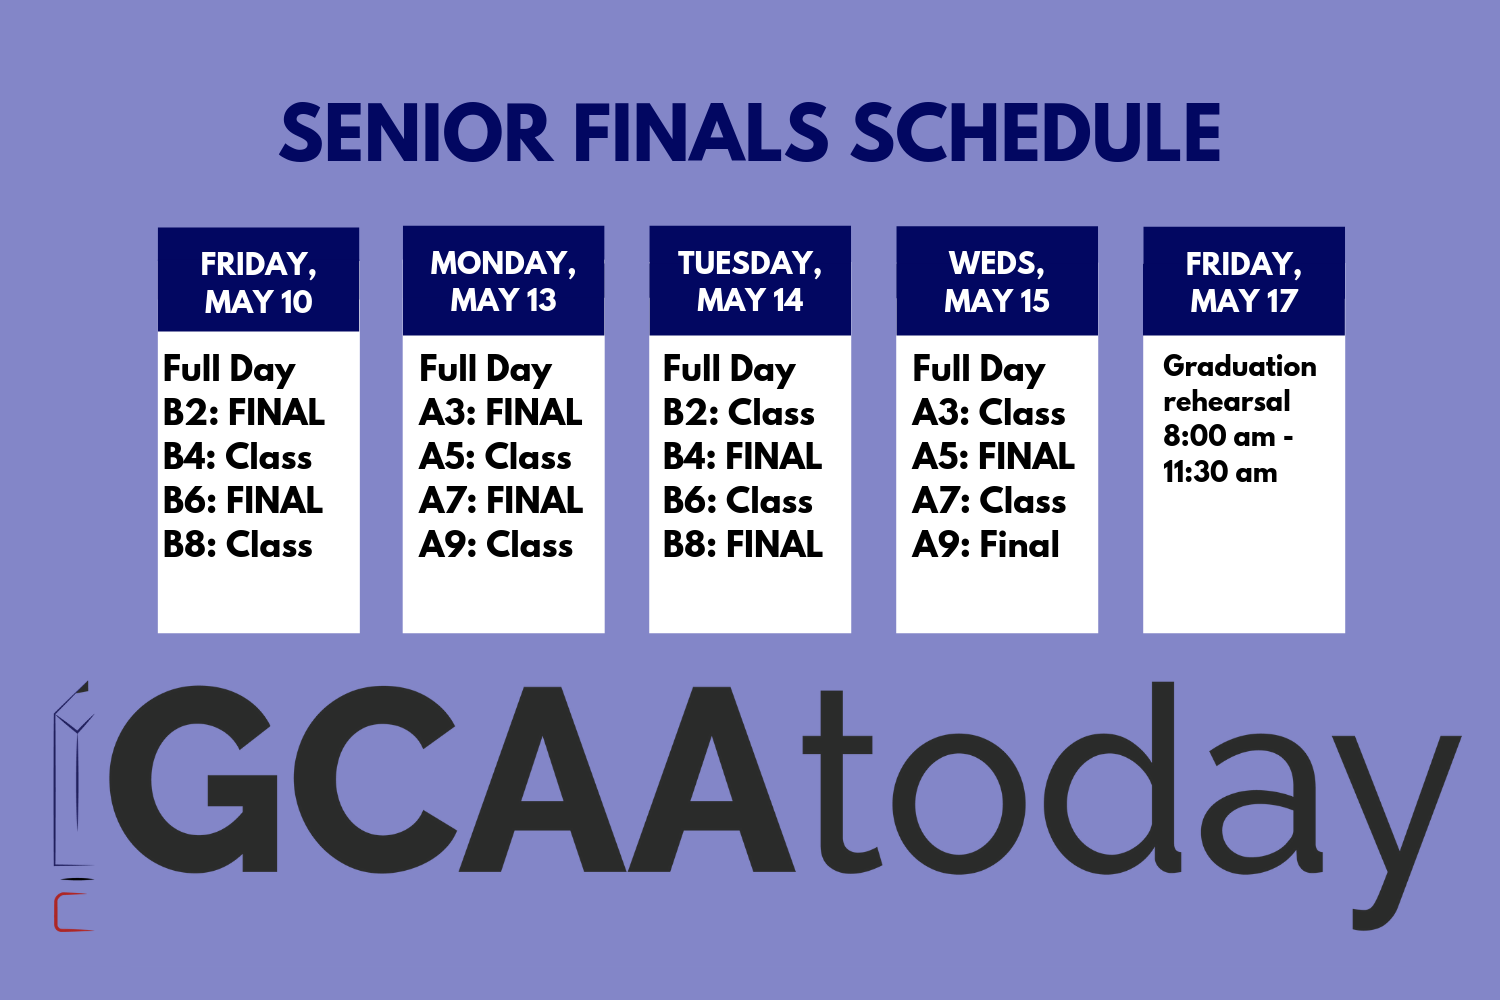 Finals near as end of school year approaches – GCAAtoday